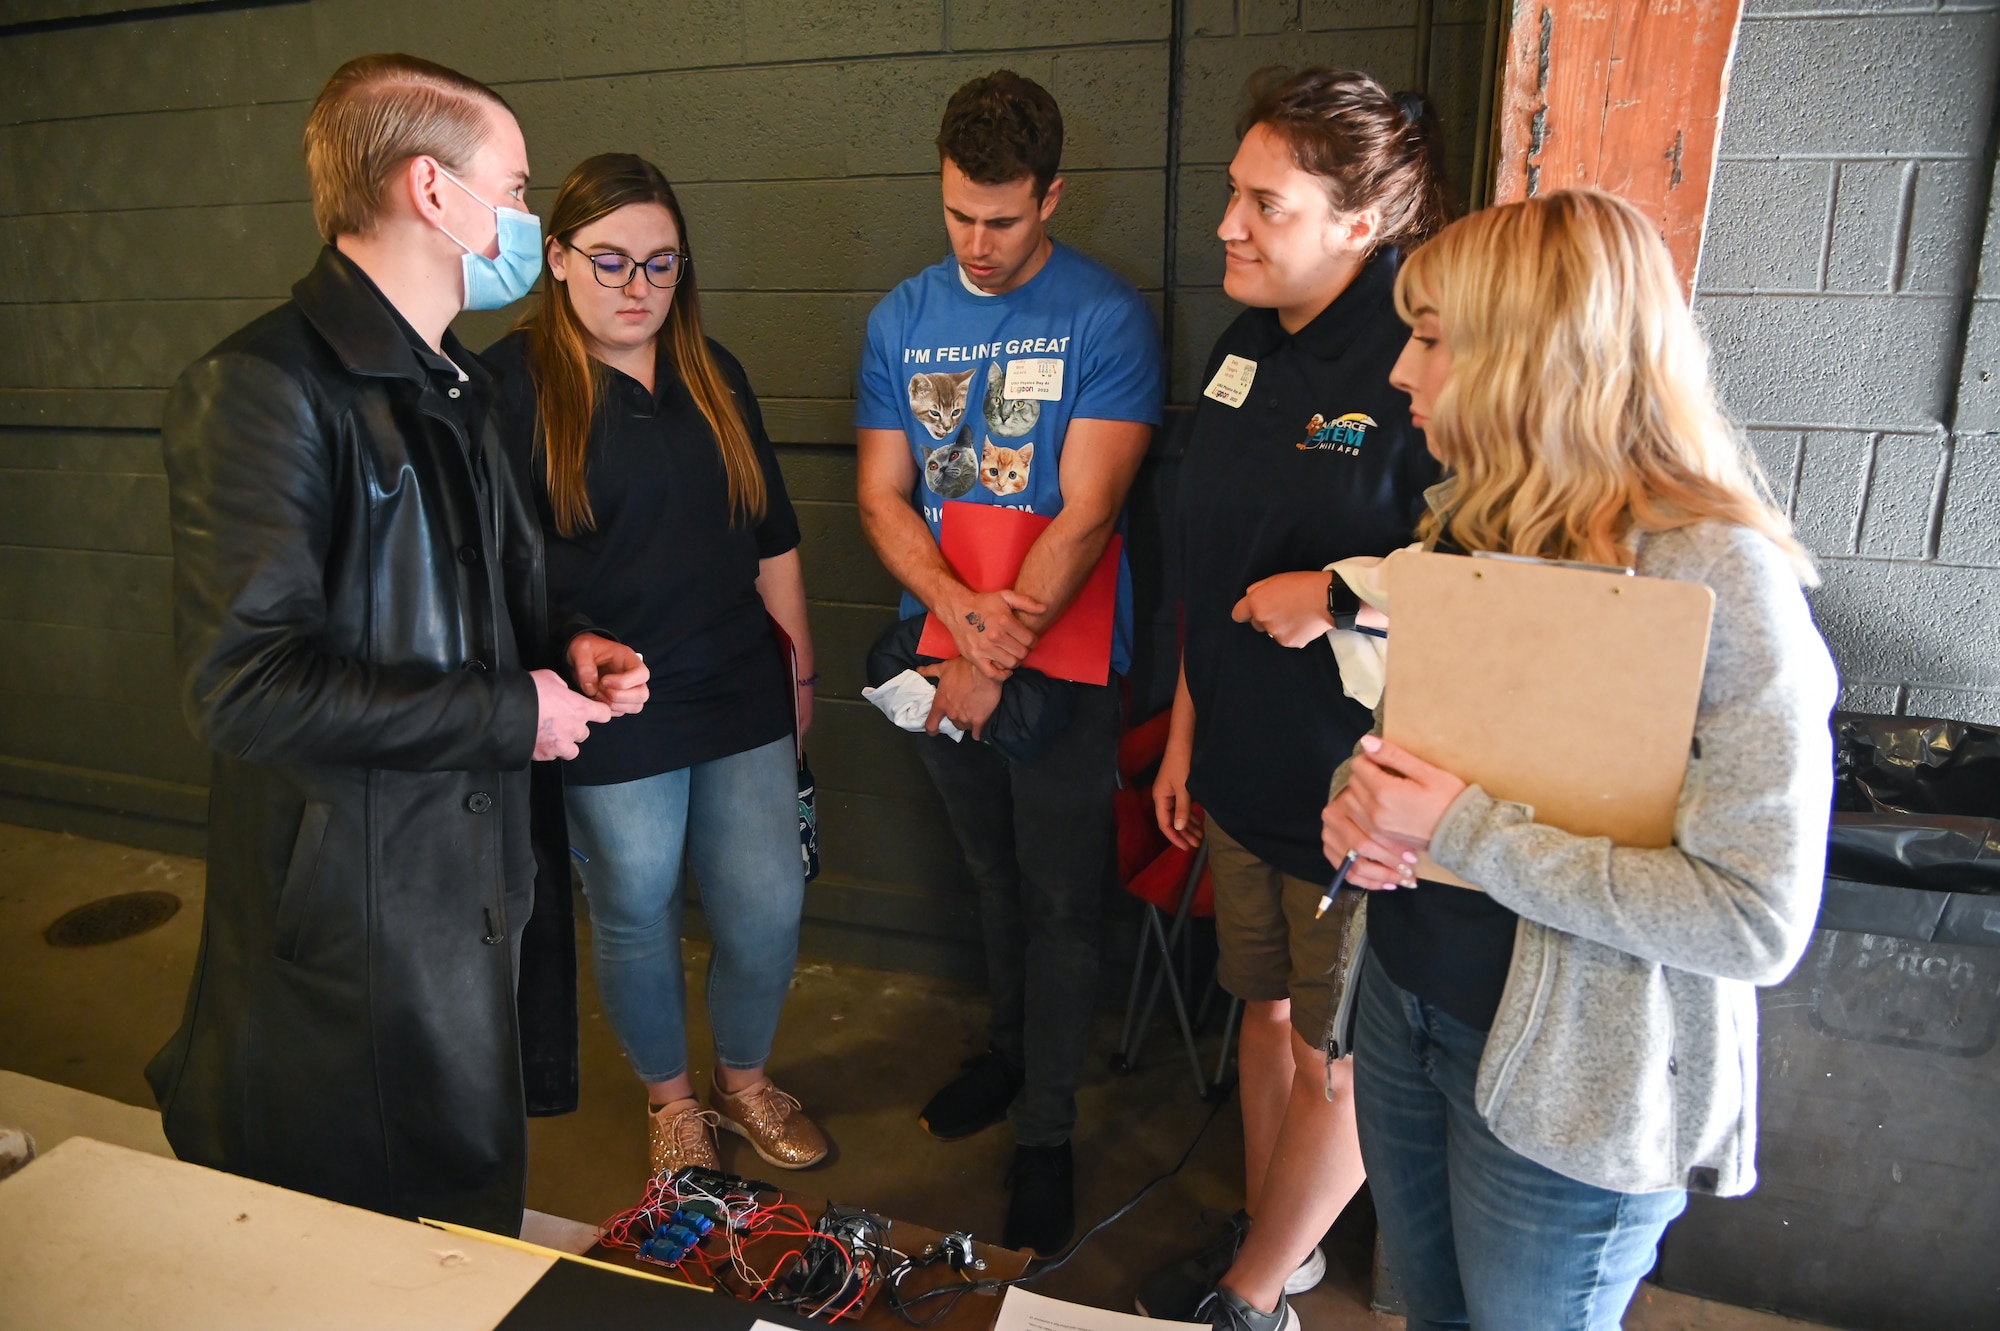 (right to left) Delaney Burton, Emily Togaga'e, Colby Bird, and Kristen Newbury, listen to a student's physics project presentation during Physics Day May 13, 2022, at Lagoon amusement park in Farmington, Utah.